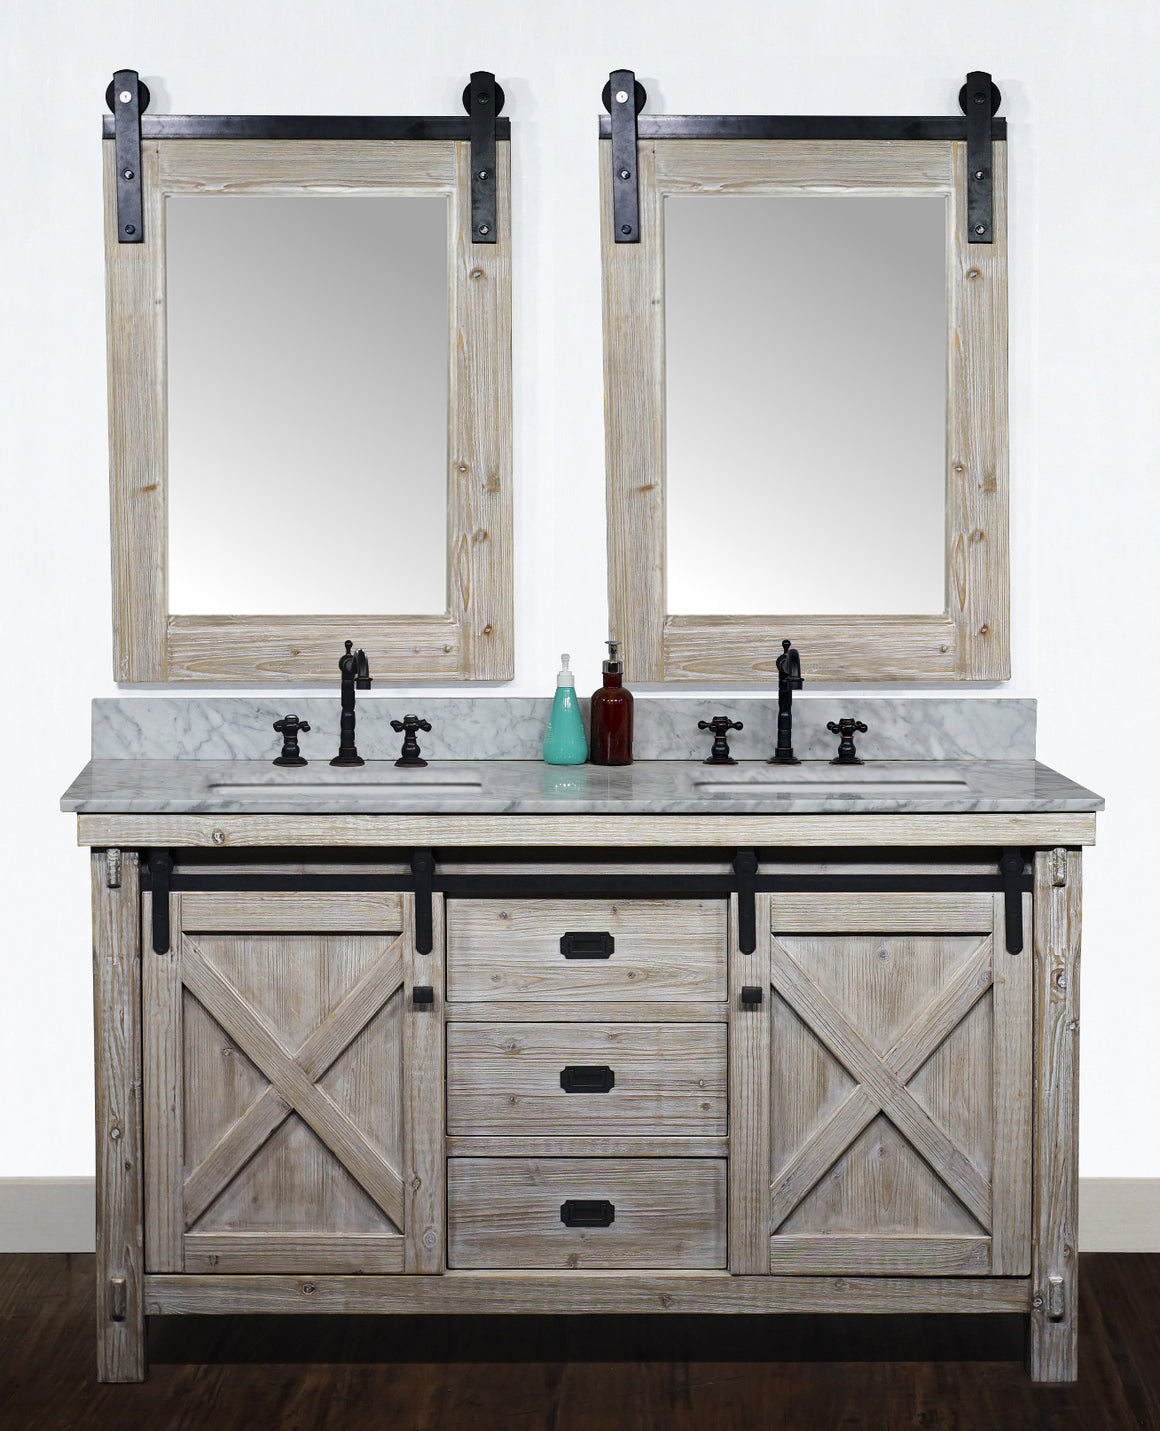 60"RUSTIC SOLID FIR BARN DOOR STYLE DOUBLE SINKS VANITY WITH CARRARA WHITE MARBLE TOP WITH RECTANGULAR SINK-NO FAUCET